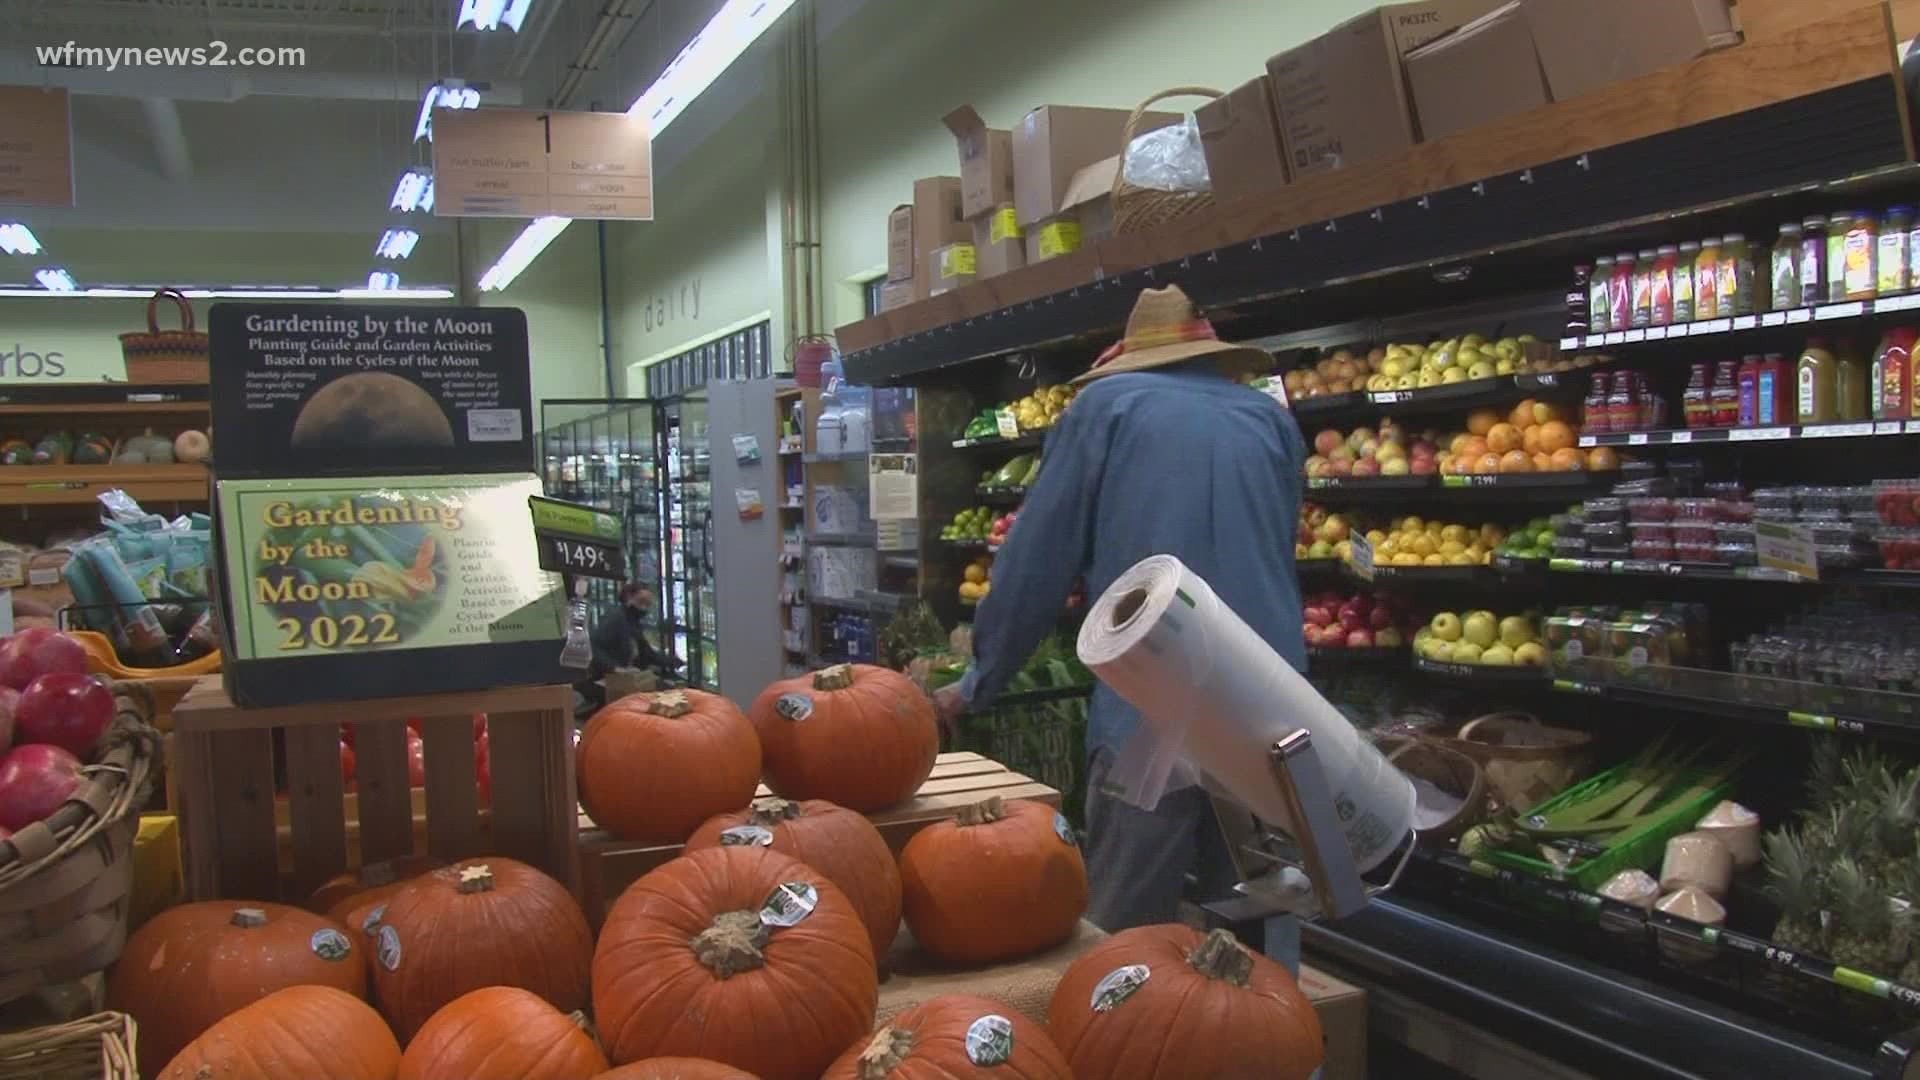 A local business is struggling to keep the shelves stocked as the country faces supply chain issues.